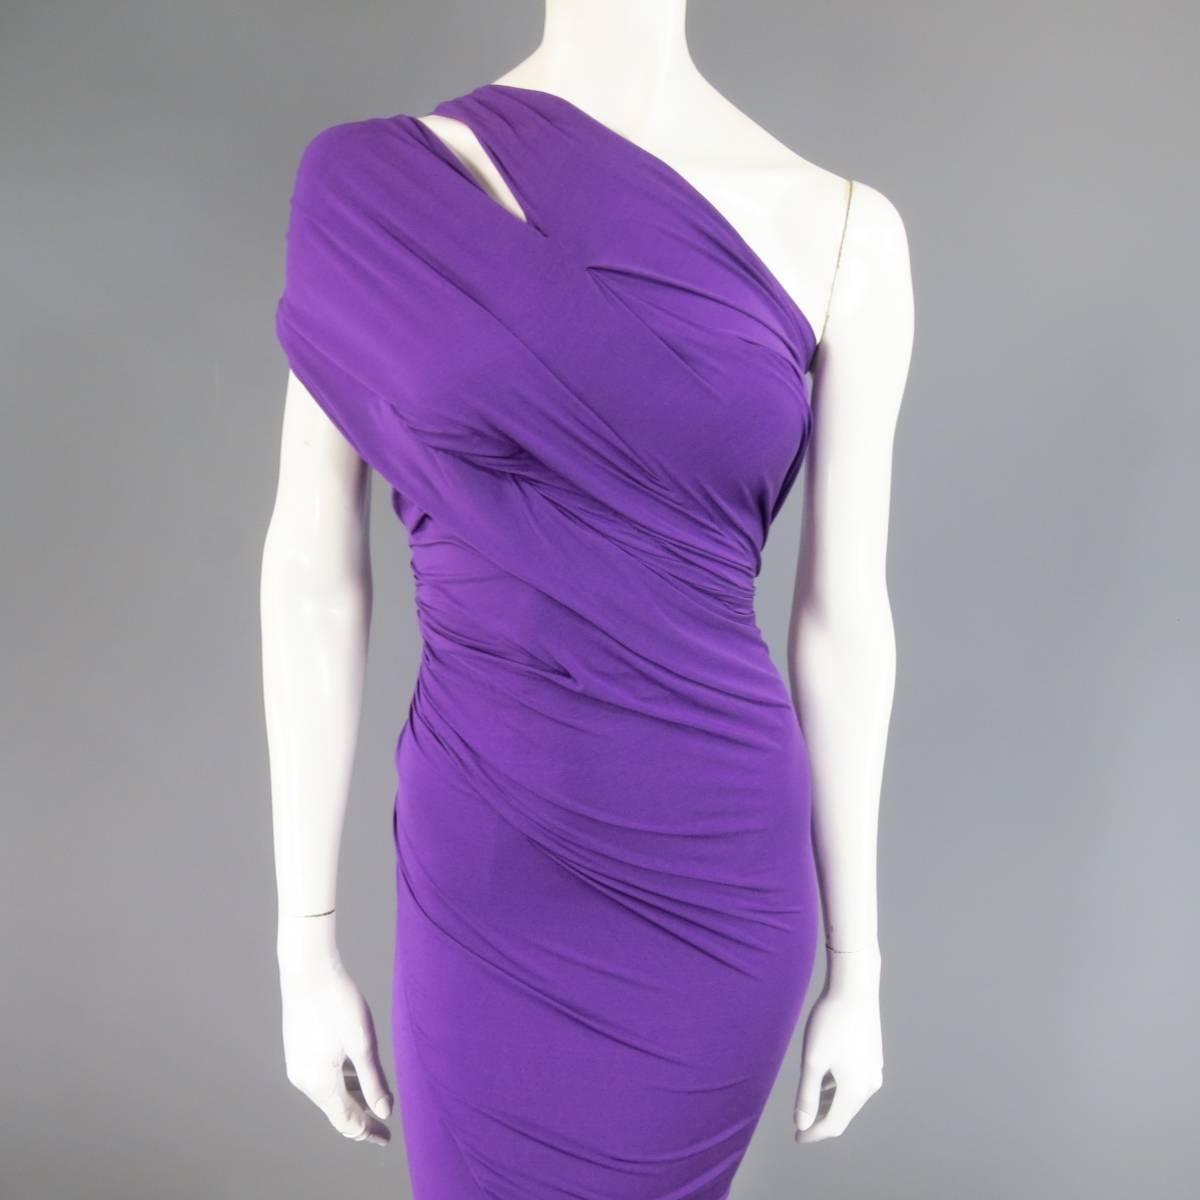 This fabulous DONNA KARAN cocktail dress comes in a brilliant orchid purple stretch silk jersey and features a one shoulder neckline with slit, fitted bodycon silhouette, and ruched mid section construction. Fully lined. Color is a true orchid